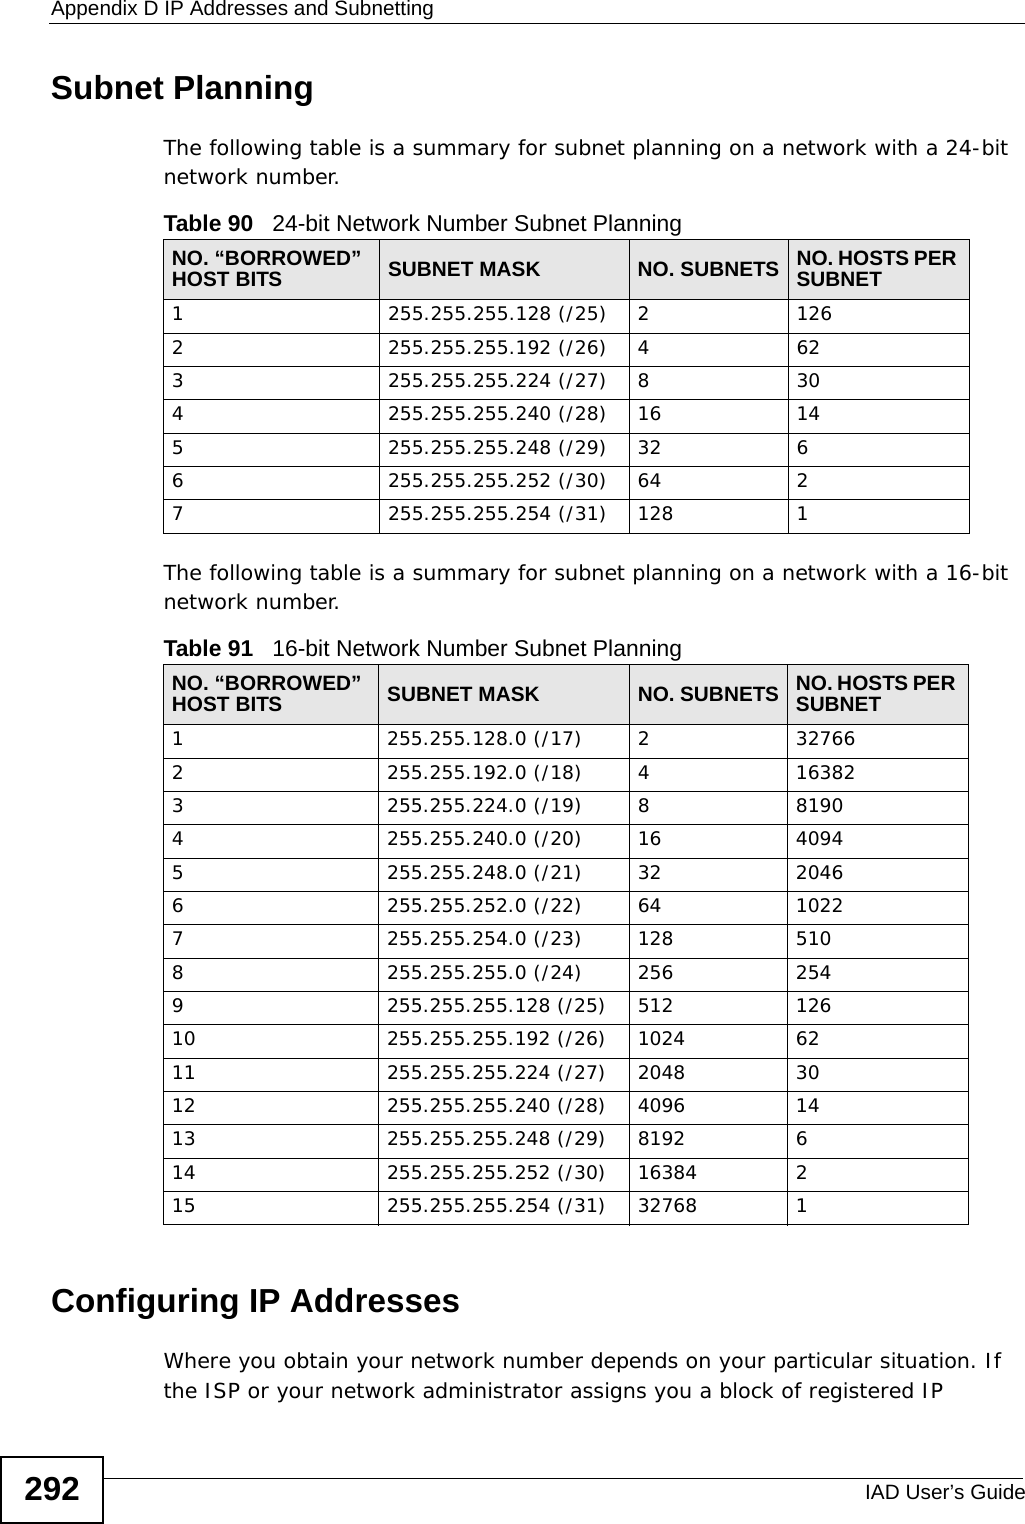 Appendix D IP Addresses and SubnettingIAD User’s Guide292Subnet PlanningThe following table is a summary for subnet planning on a network with a 24-bit network number.The following table is a summary for subnet planning on a network with a 16-bit network number. Configuring IP AddressesWhere you obtain your network number depends on your particular situation. If the ISP or your network administrator assigns you a block of registered IP Table 90   24-bit Network Number Subnet PlanningNO. “BORROWED” HOST BITS SUBNET MASK NO. SUBNETS NO. HOSTS PER SUBNET1255.255.255.128 (/25) 21262255.255.255.192 (/26) 4623255.255.255.224 (/27) 8304255.255.255.240 (/28) 16 145255.255.255.248 (/29) 32 66255.255.255.252 (/30) 64 27255.255.255.254 (/31) 128 1Table 91   16-bit Network Number Subnet PlanningNO. “BORROWED” HOST BITS SUBNET MASK NO. SUBNETS NO. HOSTS PER SUBNET1255.255.128.0 (/17) 2327662255.255.192.0 (/18) 4163823255.255.224.0 (/19) 881904255.255.240.0 (/20) 16 40945255.255.248.0 (/21) 32 20466255.255.252.0 (/22) 64 10227255.255.254.0 (/23) 128 5108255.255.255.0 (/24) 256 2549255.255.255.128 (/25) 512 12610 255.255.255.192 (/26) 1024 6211 255.255.255.224 (/27) 2048 3012 255.255.255.240 (/28) 4096 1413 255.255.255.248 (/29) 8192 614 255.255.255.252 (/30) 16384 215 255.255.255.254 (/31) 32768 1